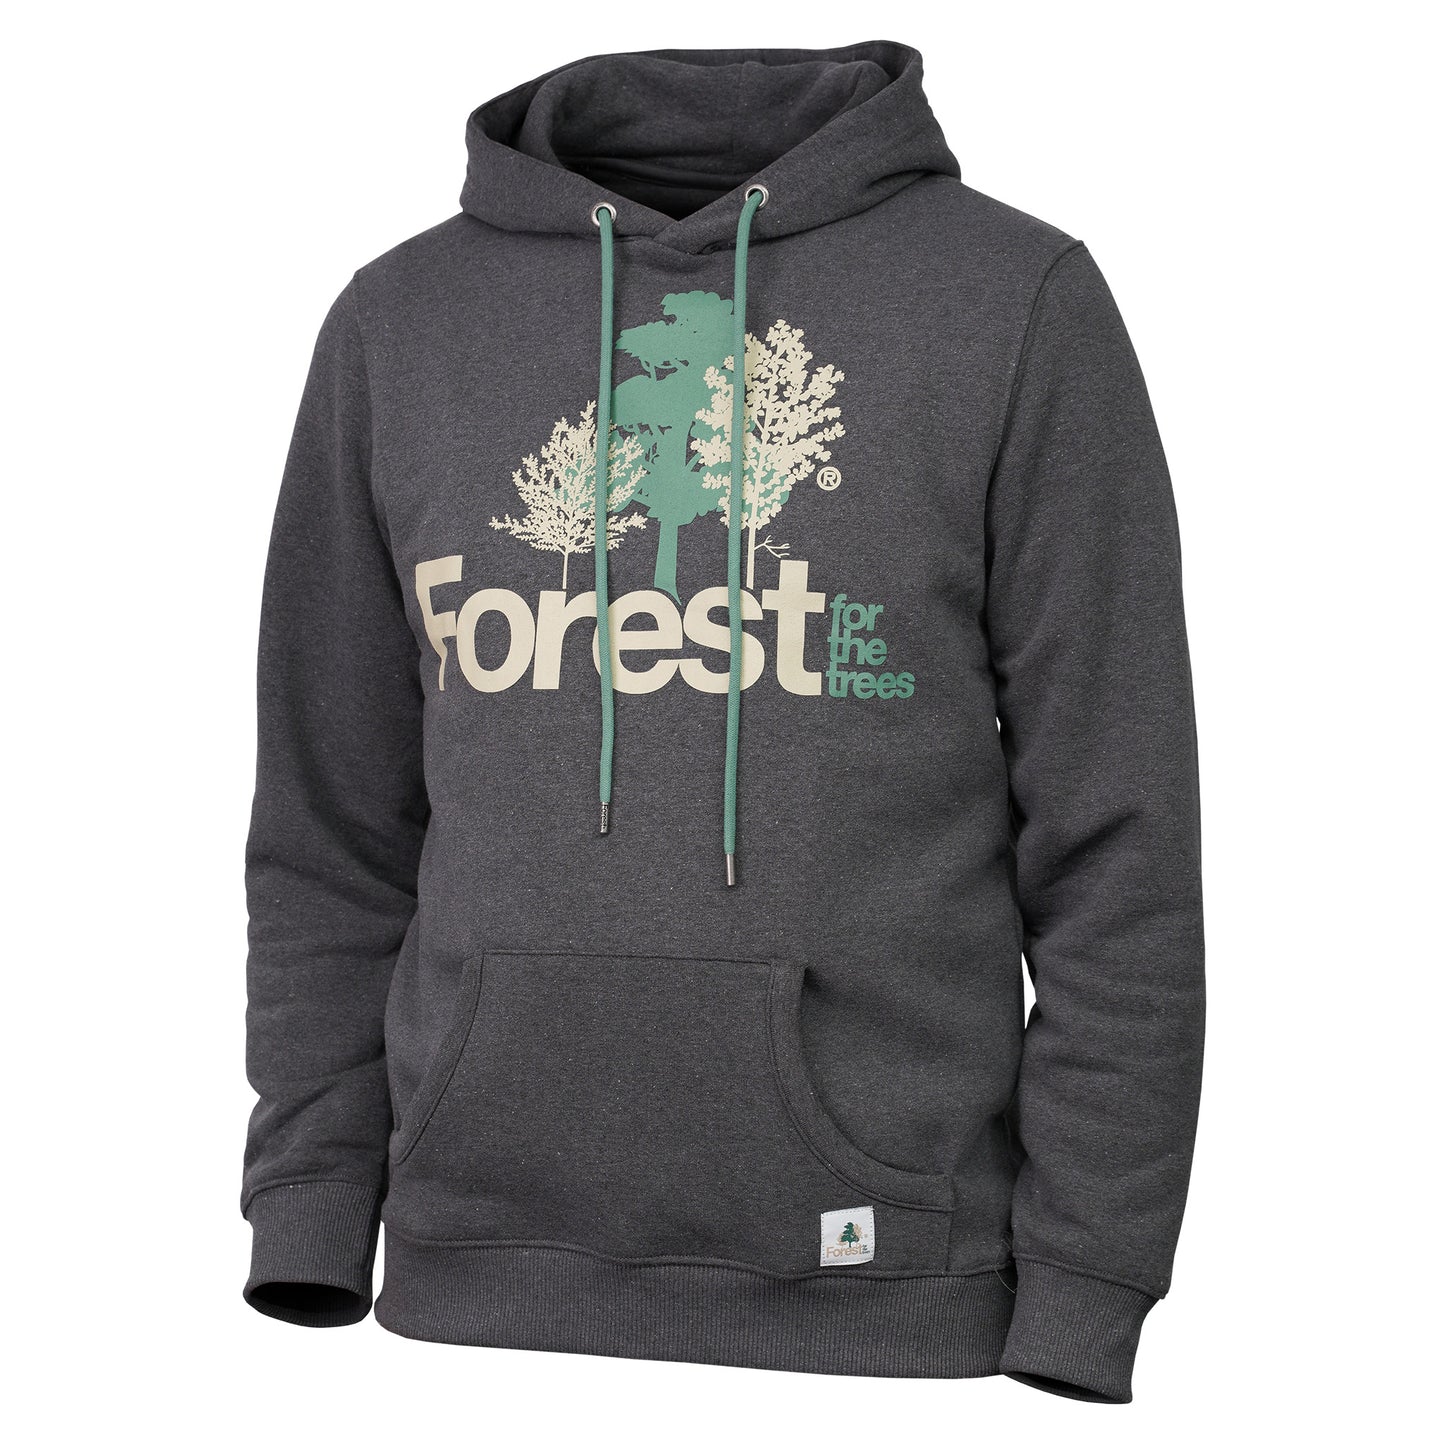 Hoodie Forest for the trees Granit Recycled Cotton